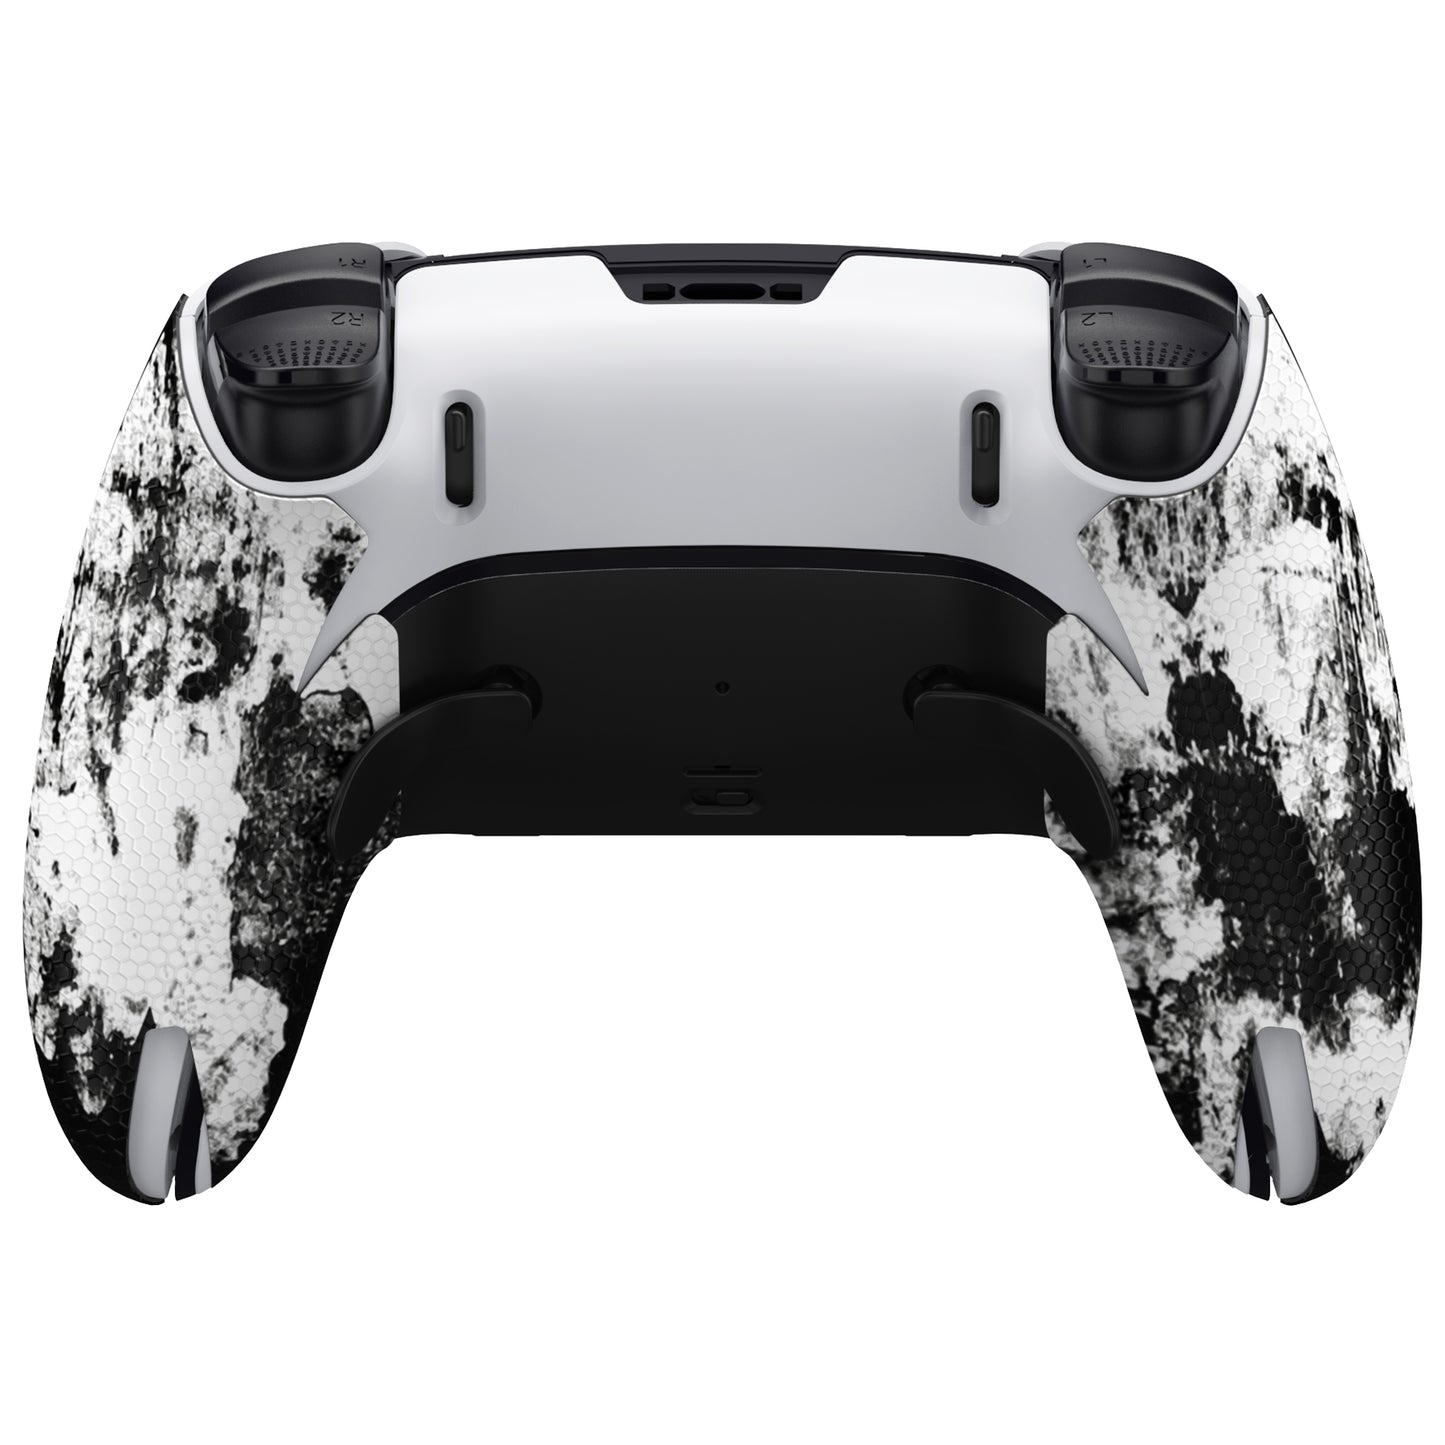 PlayVital Anti-Skid Sweat-Absorbent Controller Grip for ps5 Edge Wireless Controller, Professional Textured Soft PU Handle Grips Anti Sweat Protector for ps5 Edge Controller - Biohazard - PFPJ150 PlayVital